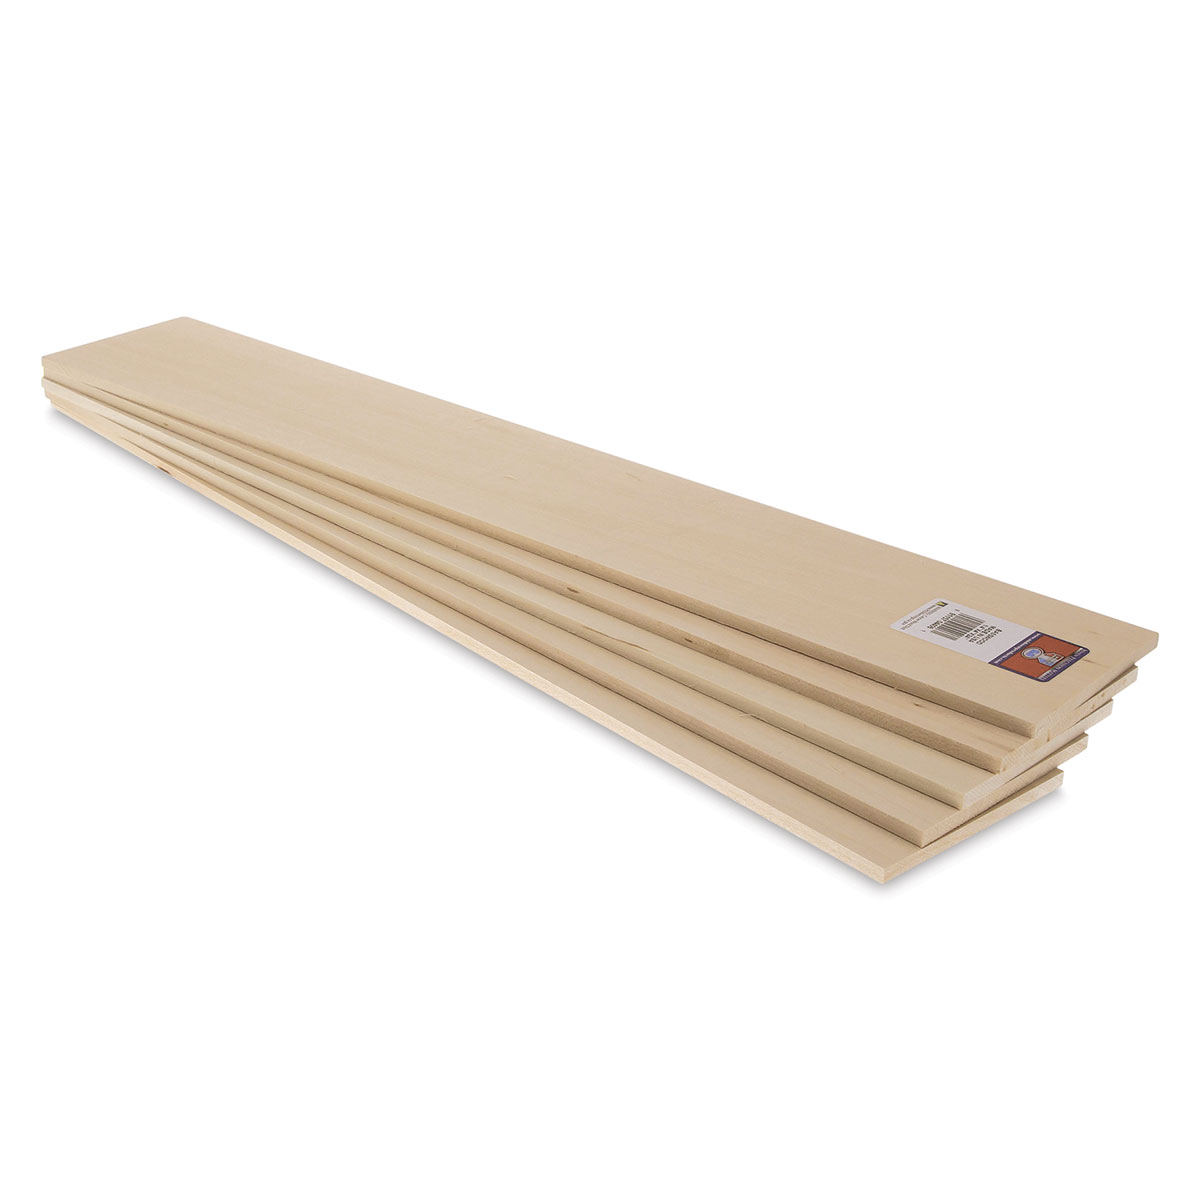 Basswood Sheet 1/4 X 3 X 24in - Case of 5